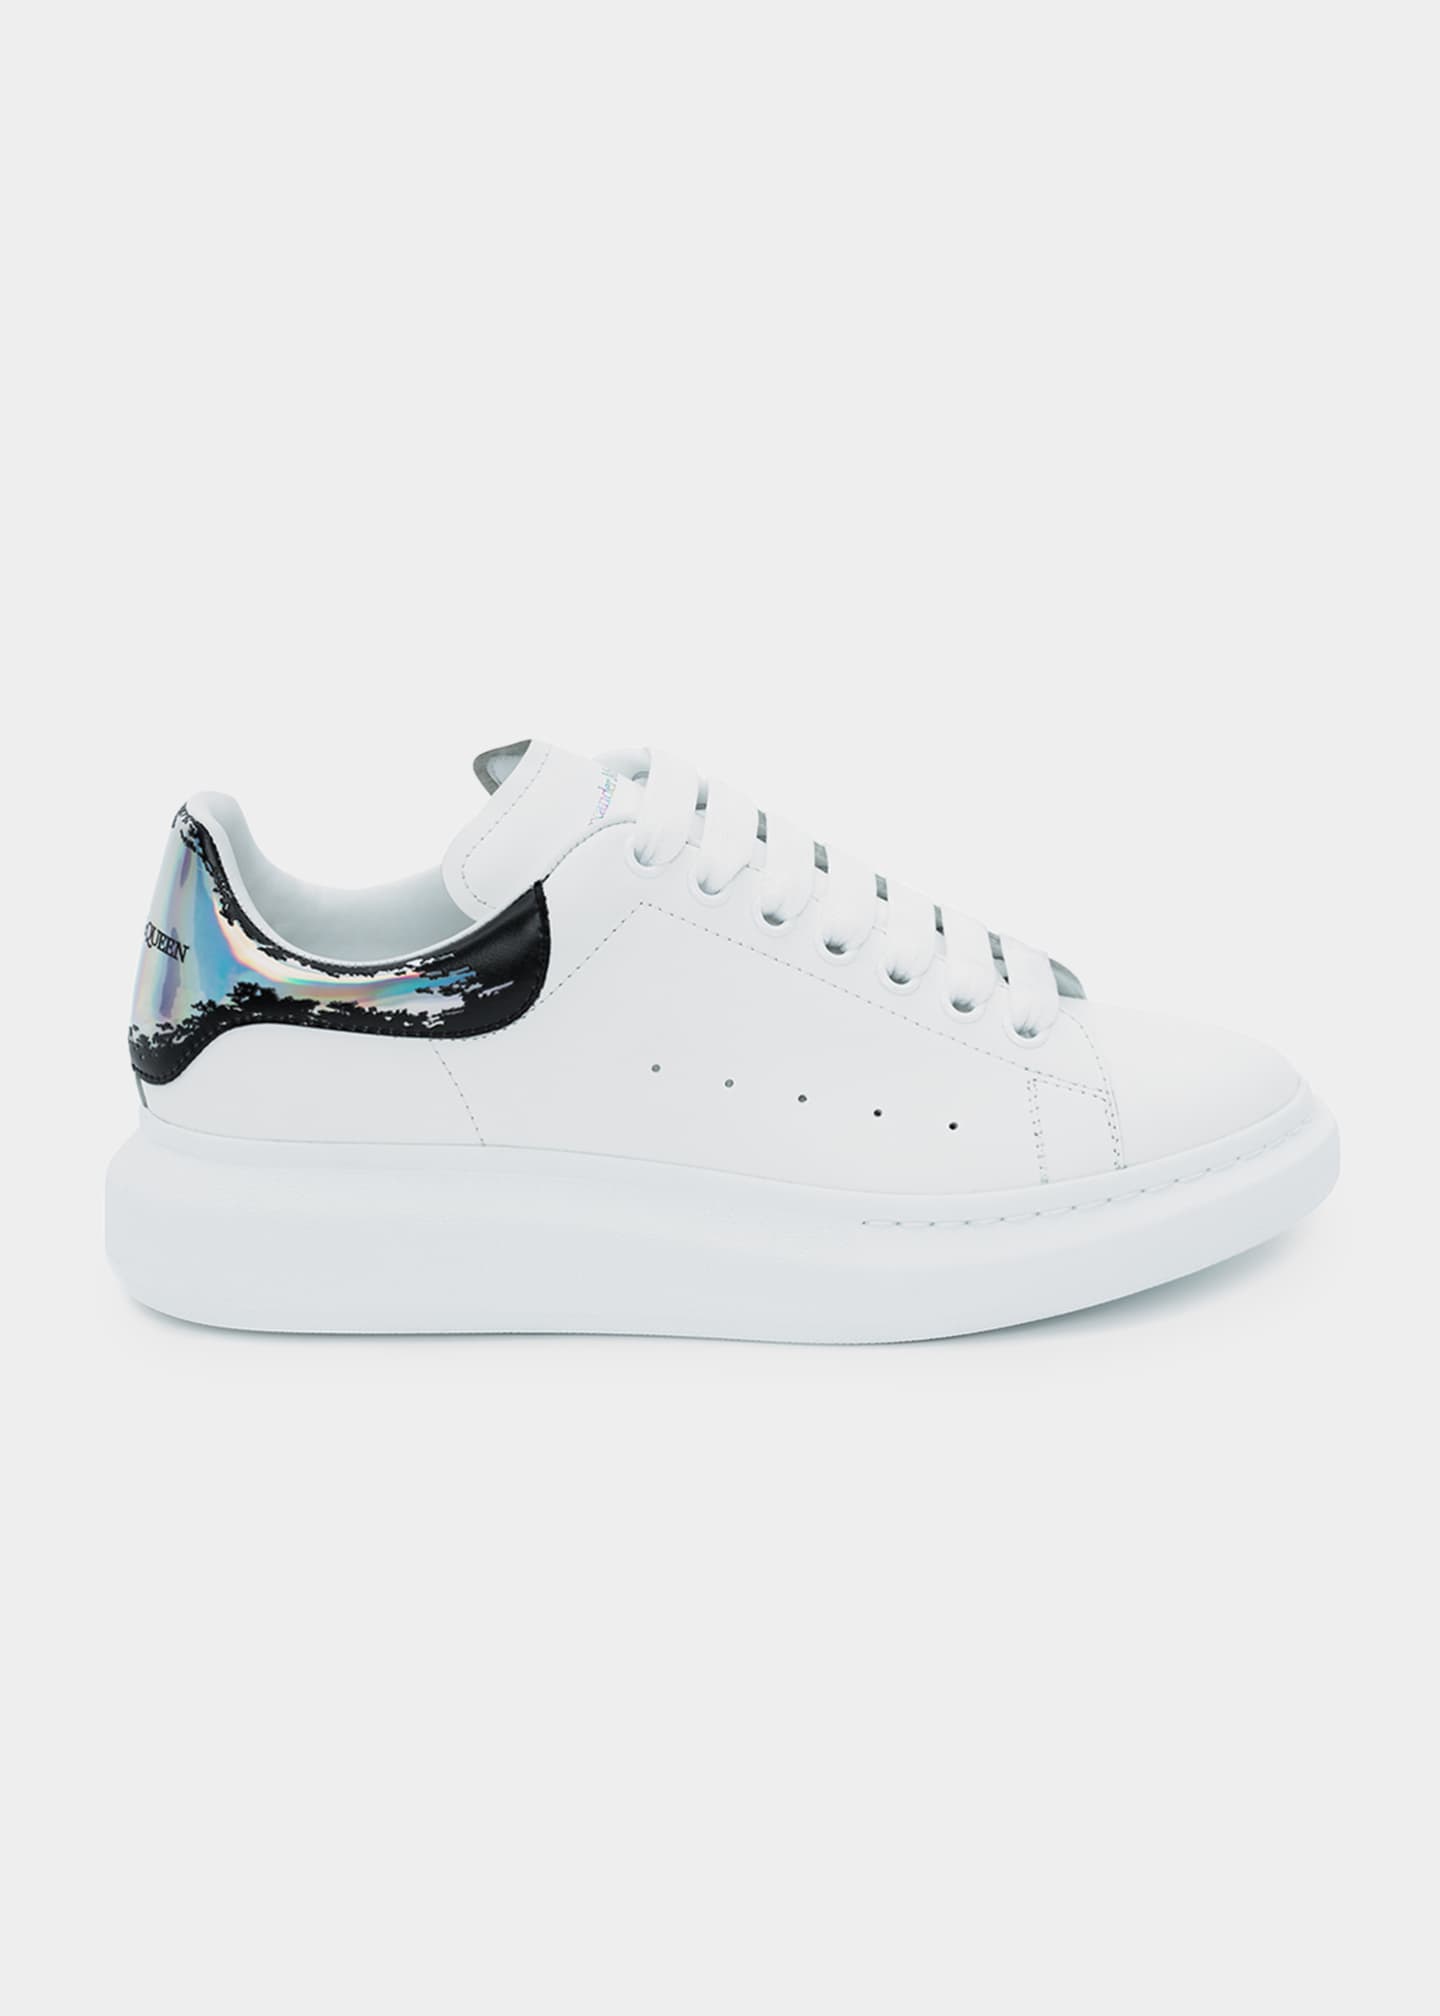 Alexander McQueen larry Oversize Leather Sneakers in White Blue Mens Trainers Alexander McQueen Trainers for Men 